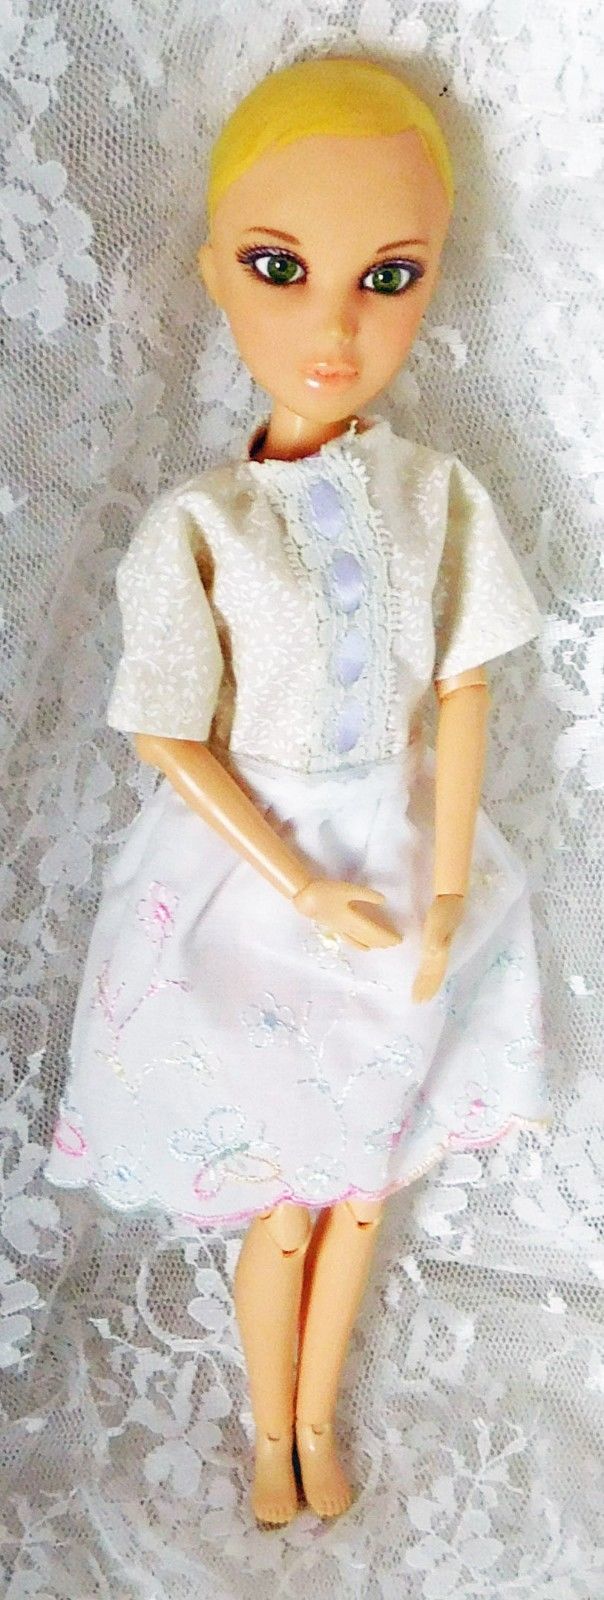 2009 Spin Master Ltd LIV 11 1/2" Doll #00621SWMG - Articulated - Handmade Outfit - $12.19